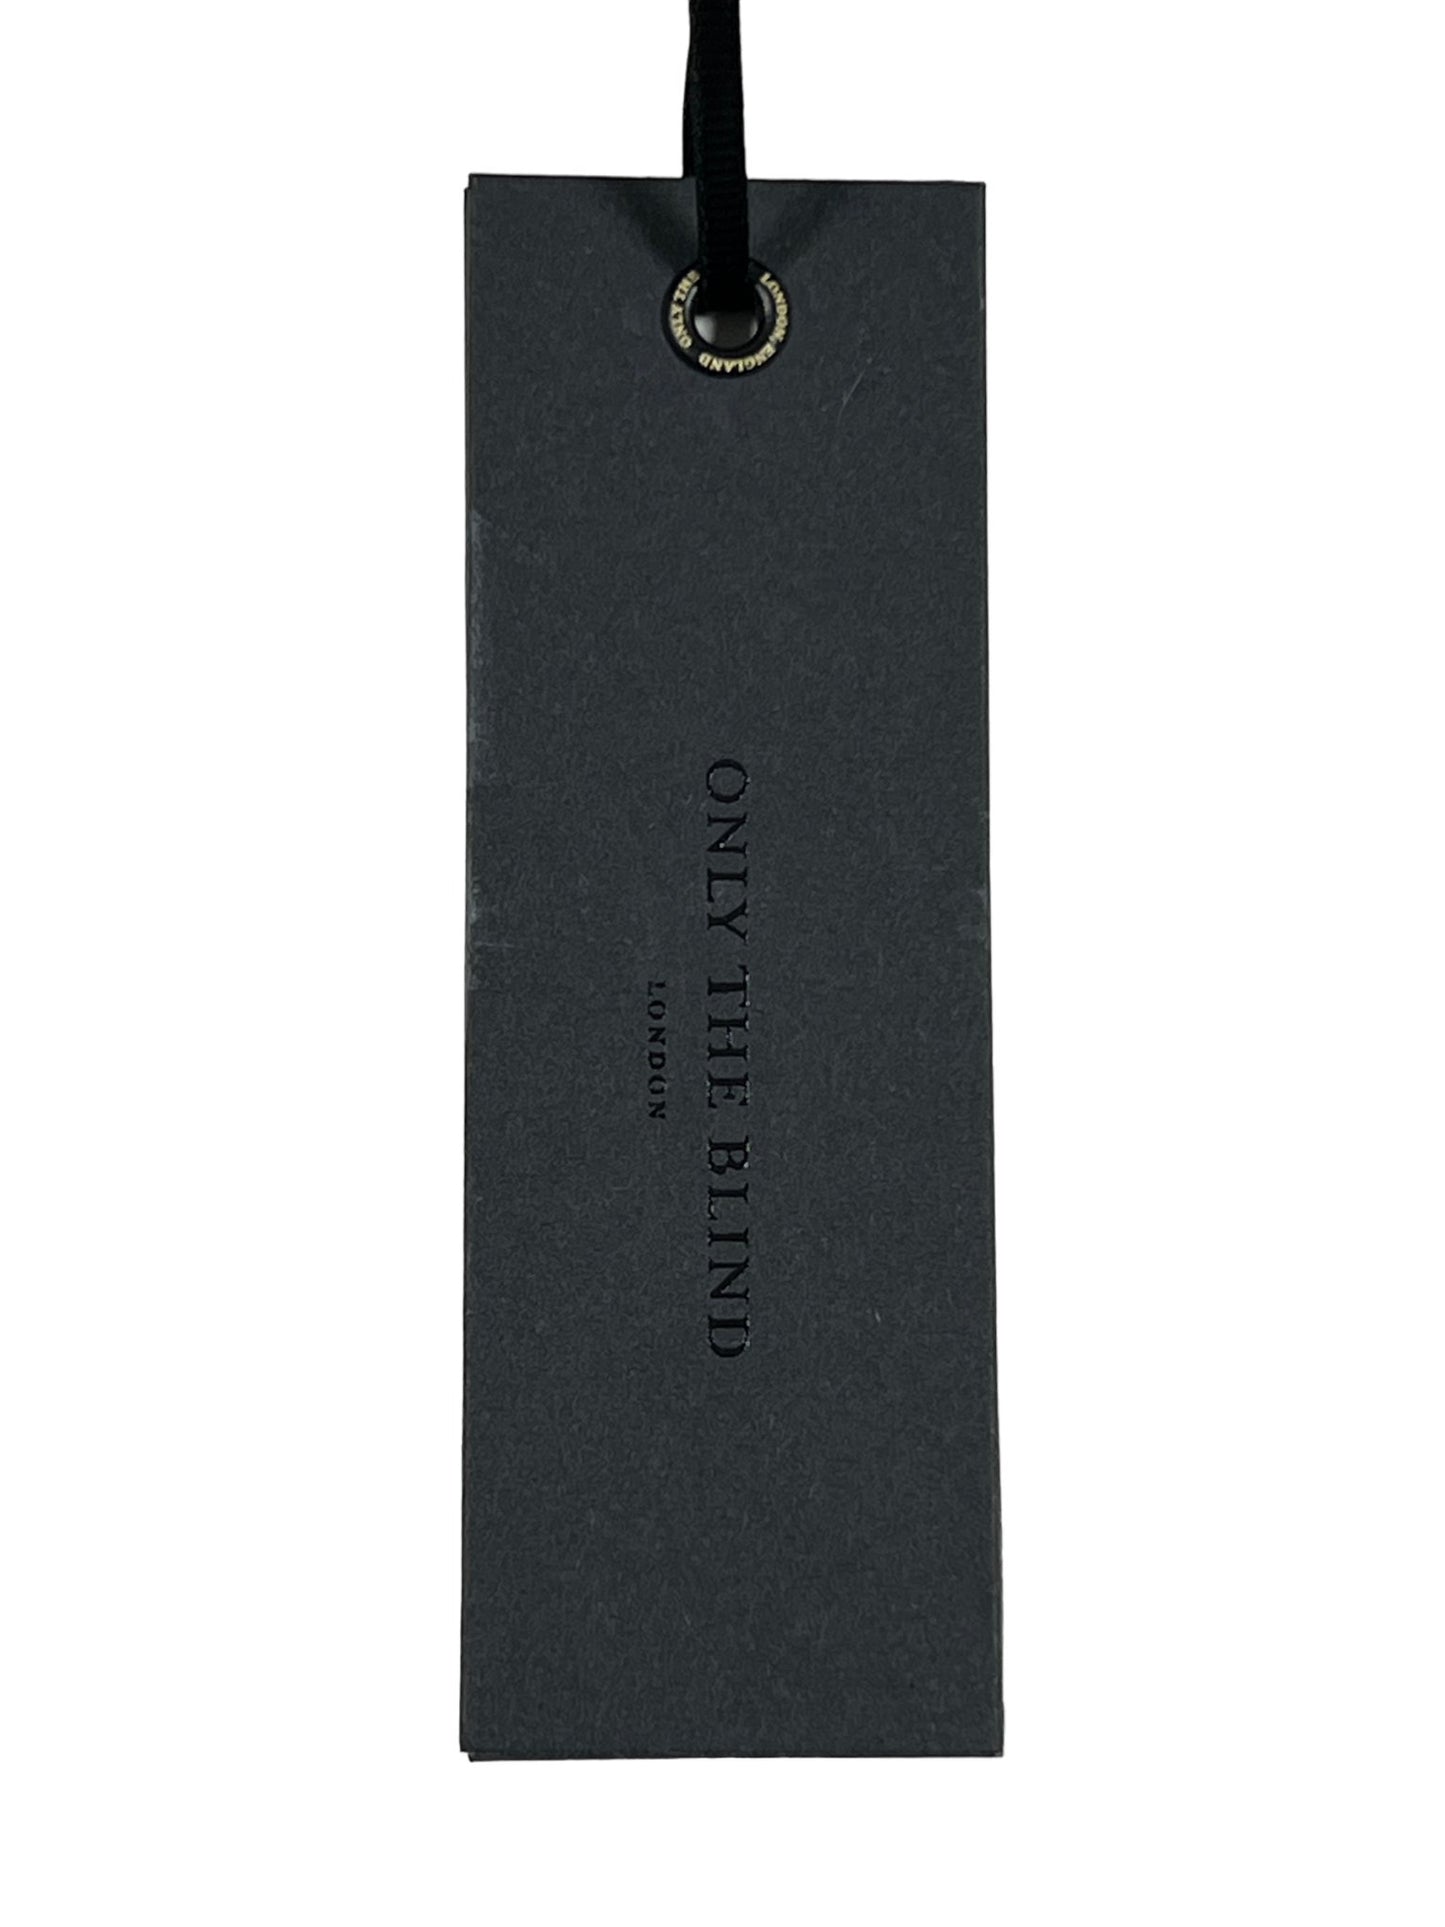 Black clothing tag with sleek black design and silver text "ONLY THE BLIND - BORN IN ENGLAND," accompanied by a black ribbon looped through a metal eyelet.